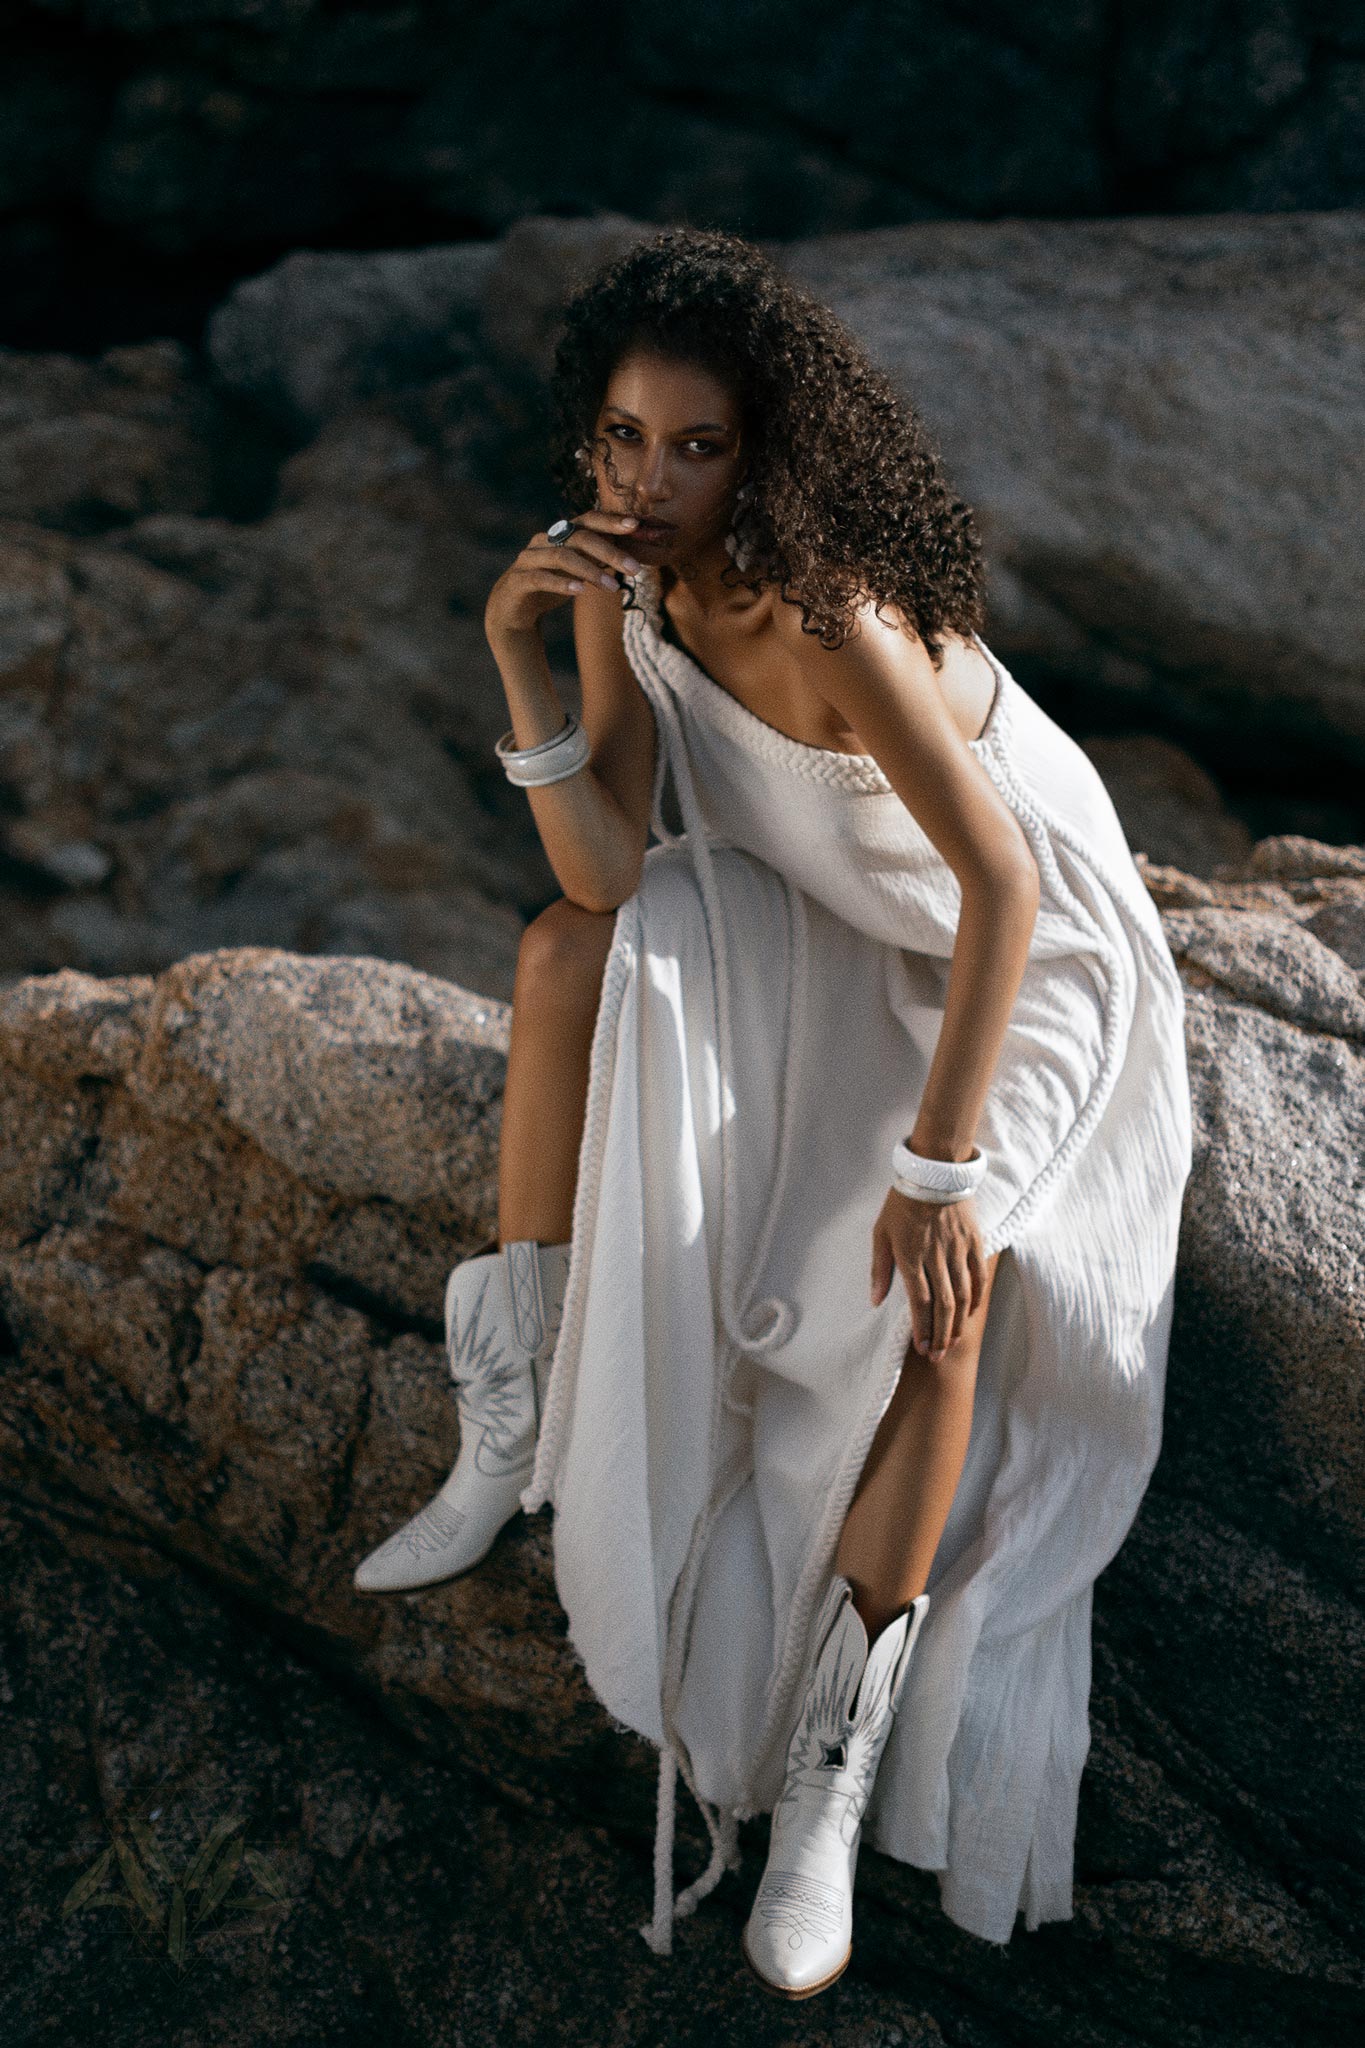 Elegant Off-White Toga Dress: Step into sophistication with our elegant off-white toga dress. Handmade from premium organic cotton, its draped silhouette and one-shoulder detail exude refined glamour.